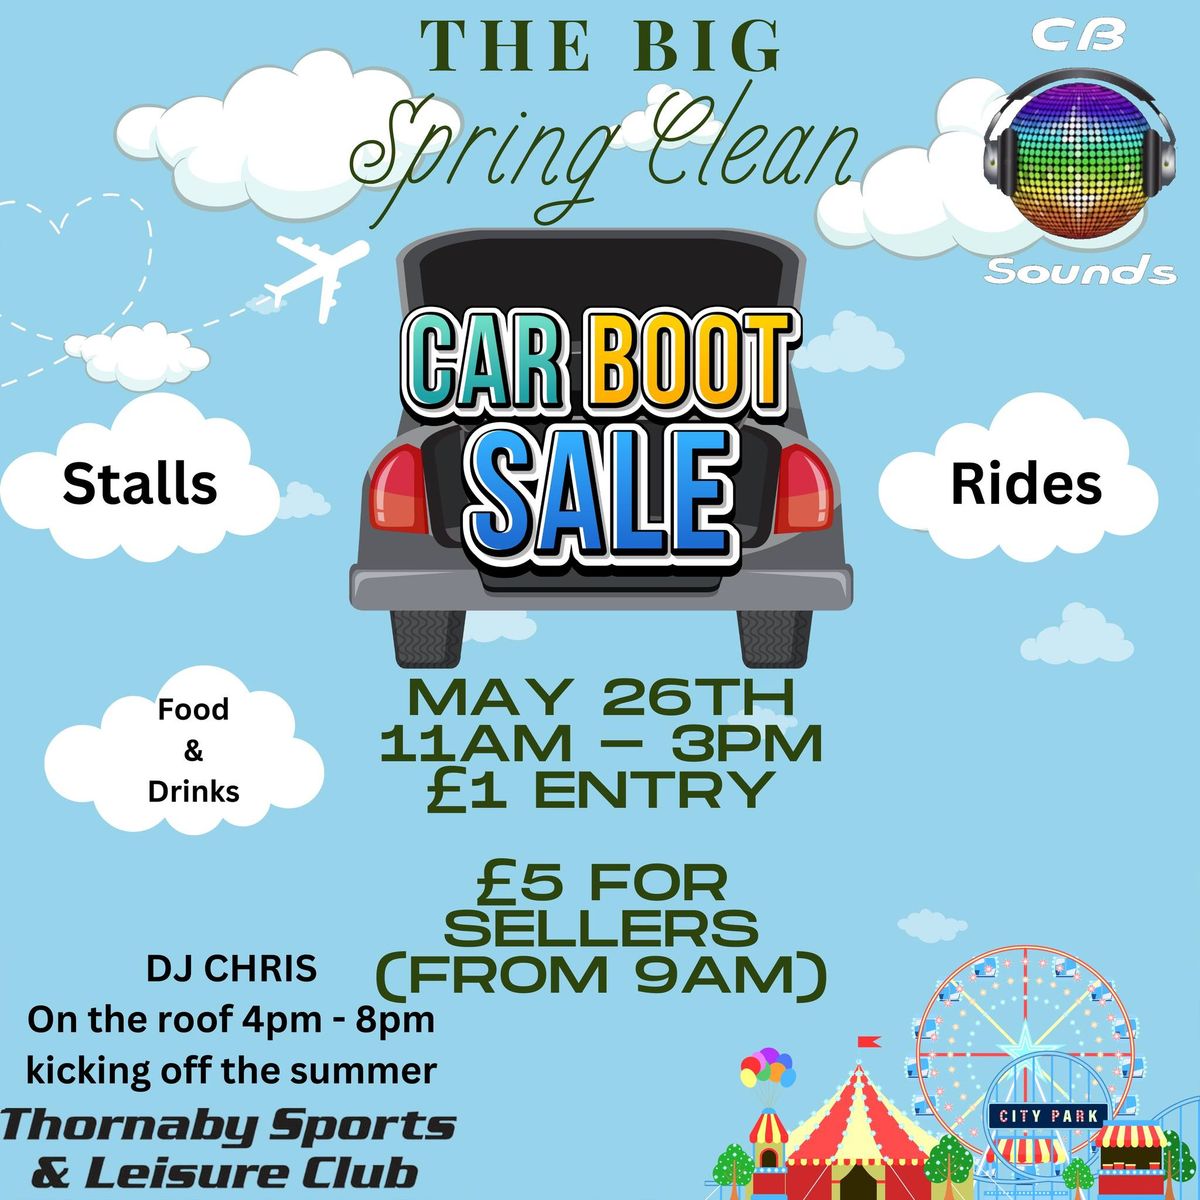 The Big Spring Clean Car Boot Sale